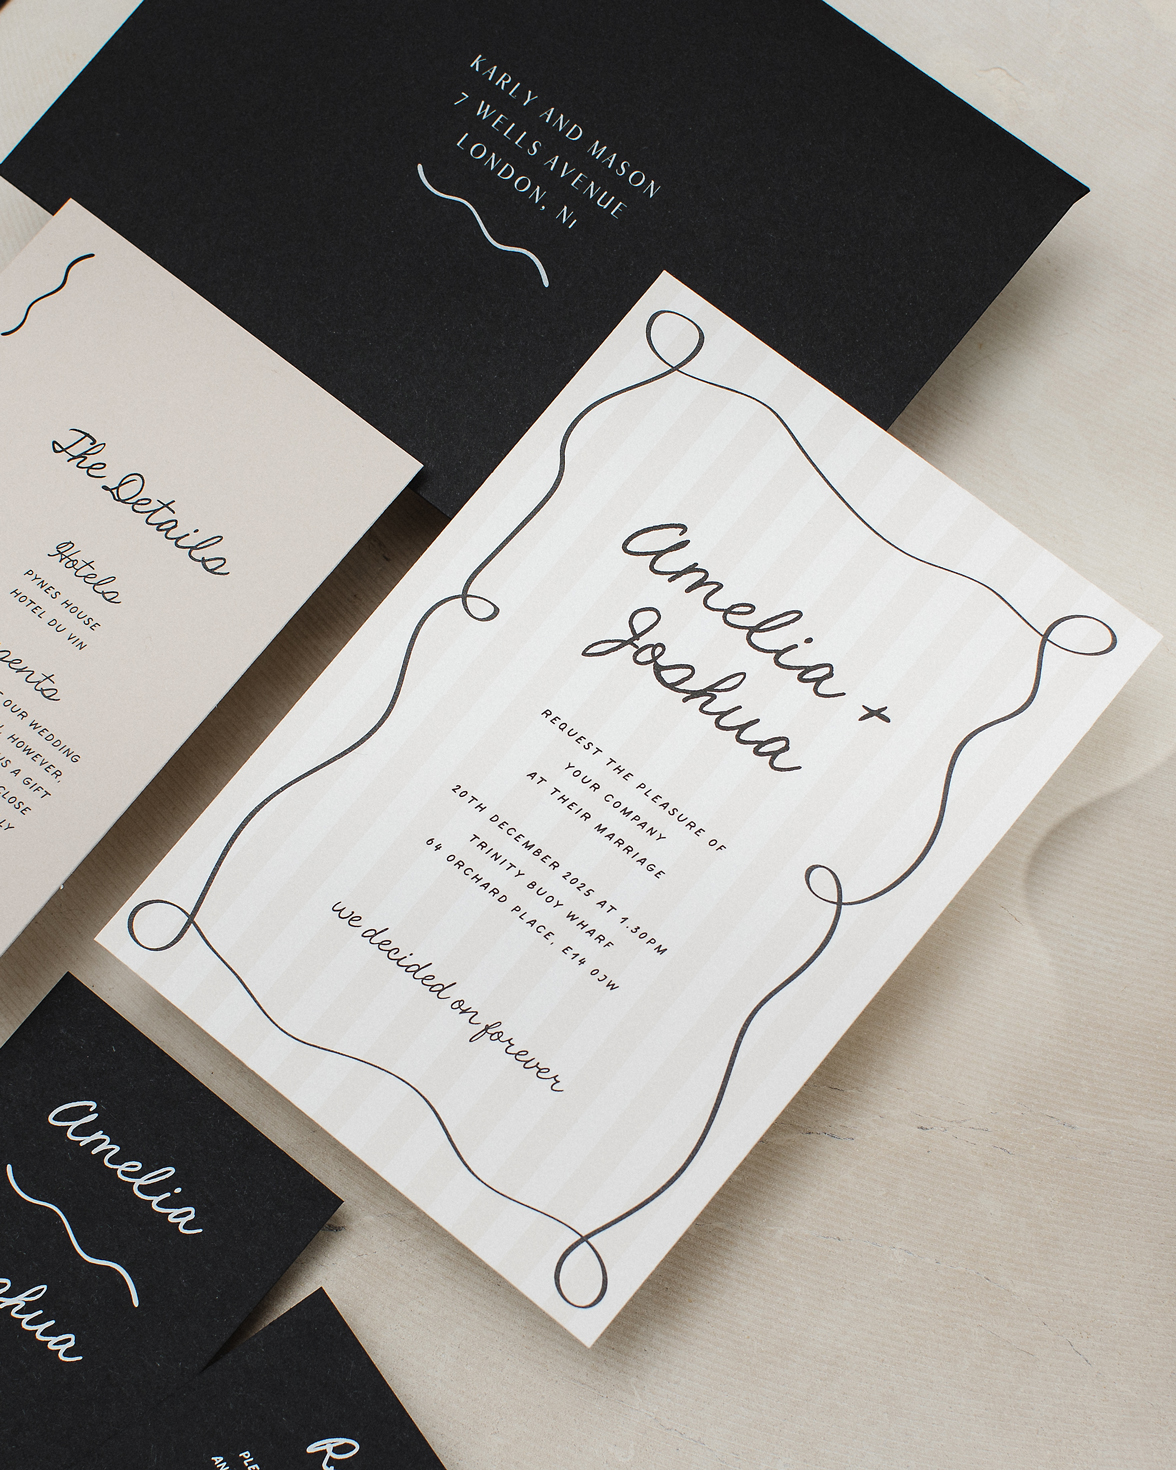 Tonal stripe wedding invitation with squiggly border and hand drawn font. Black envelope addressed with white ink